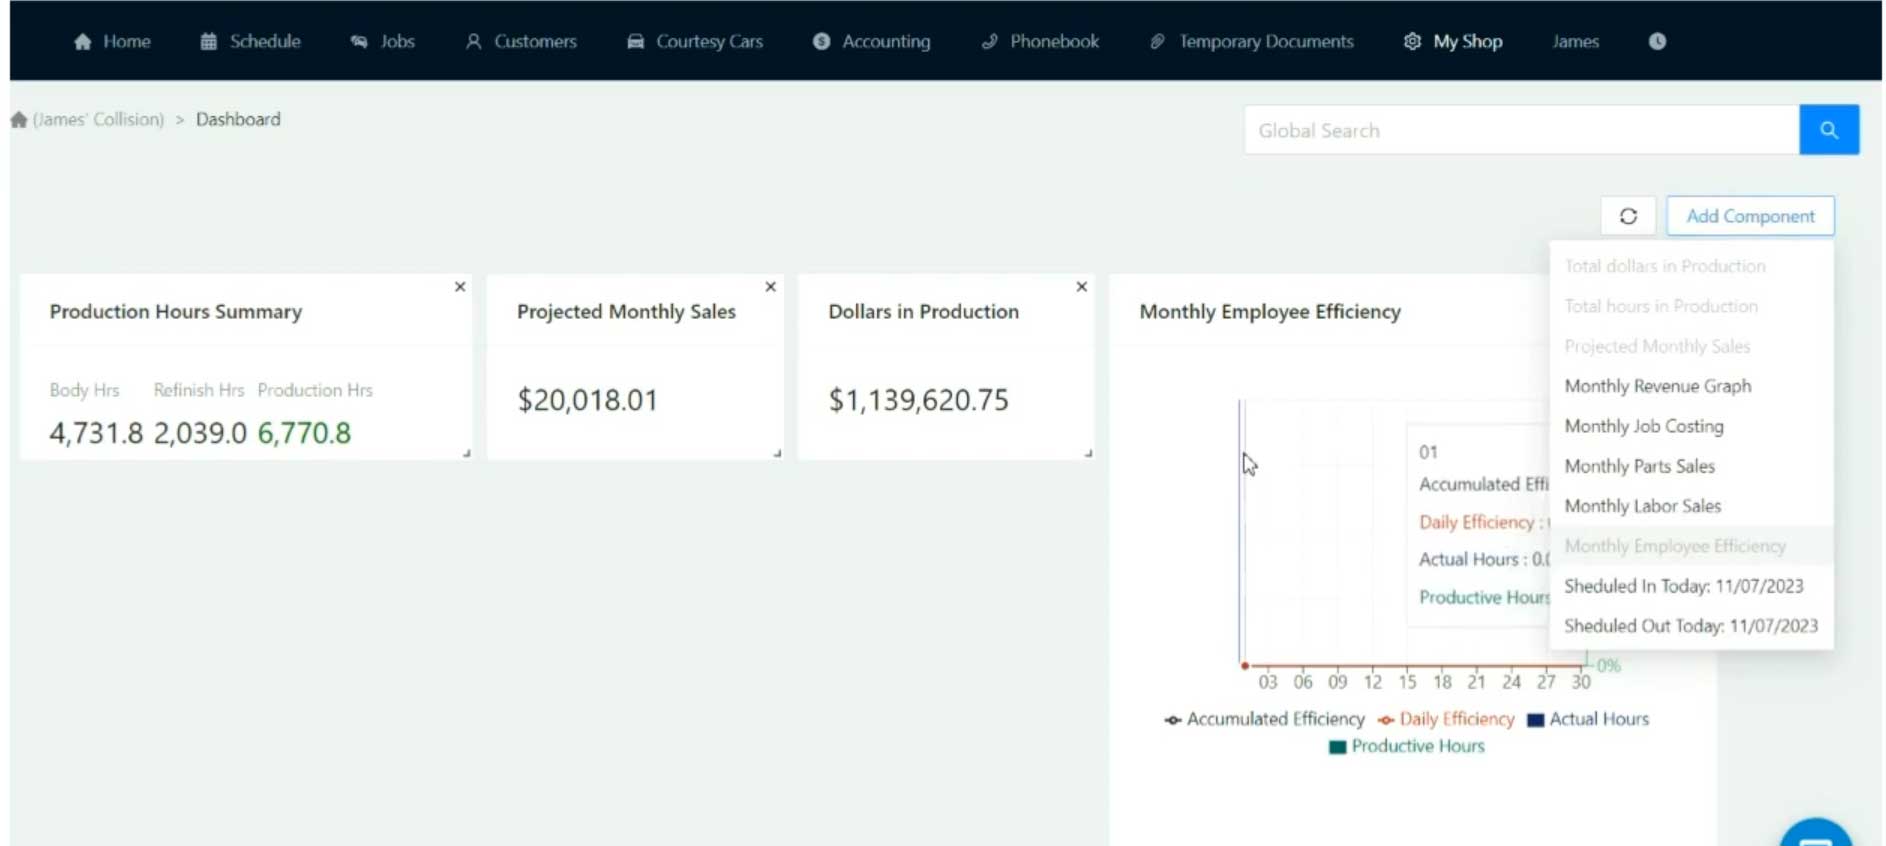 Manager Dashboard